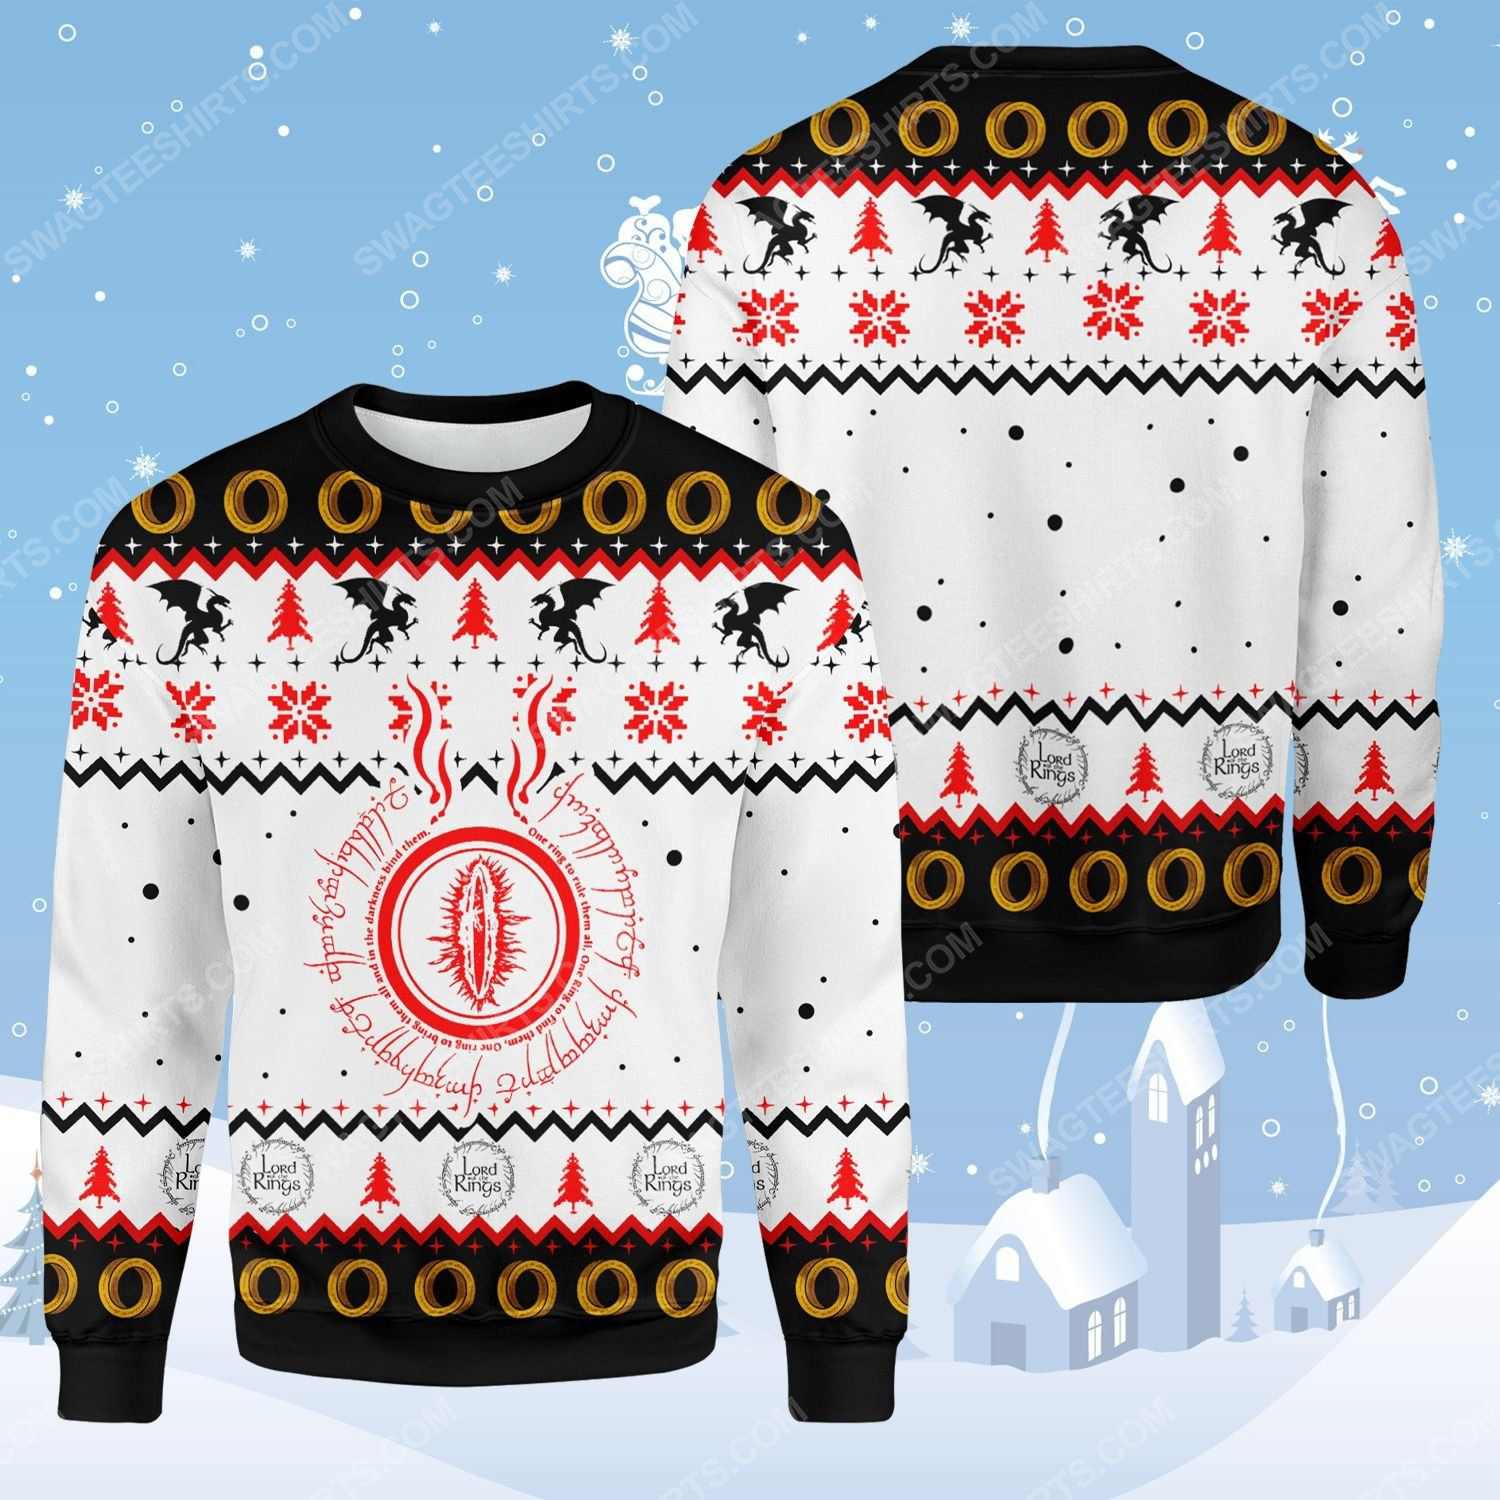 The lord of the rings one ring ugly christmas sweater